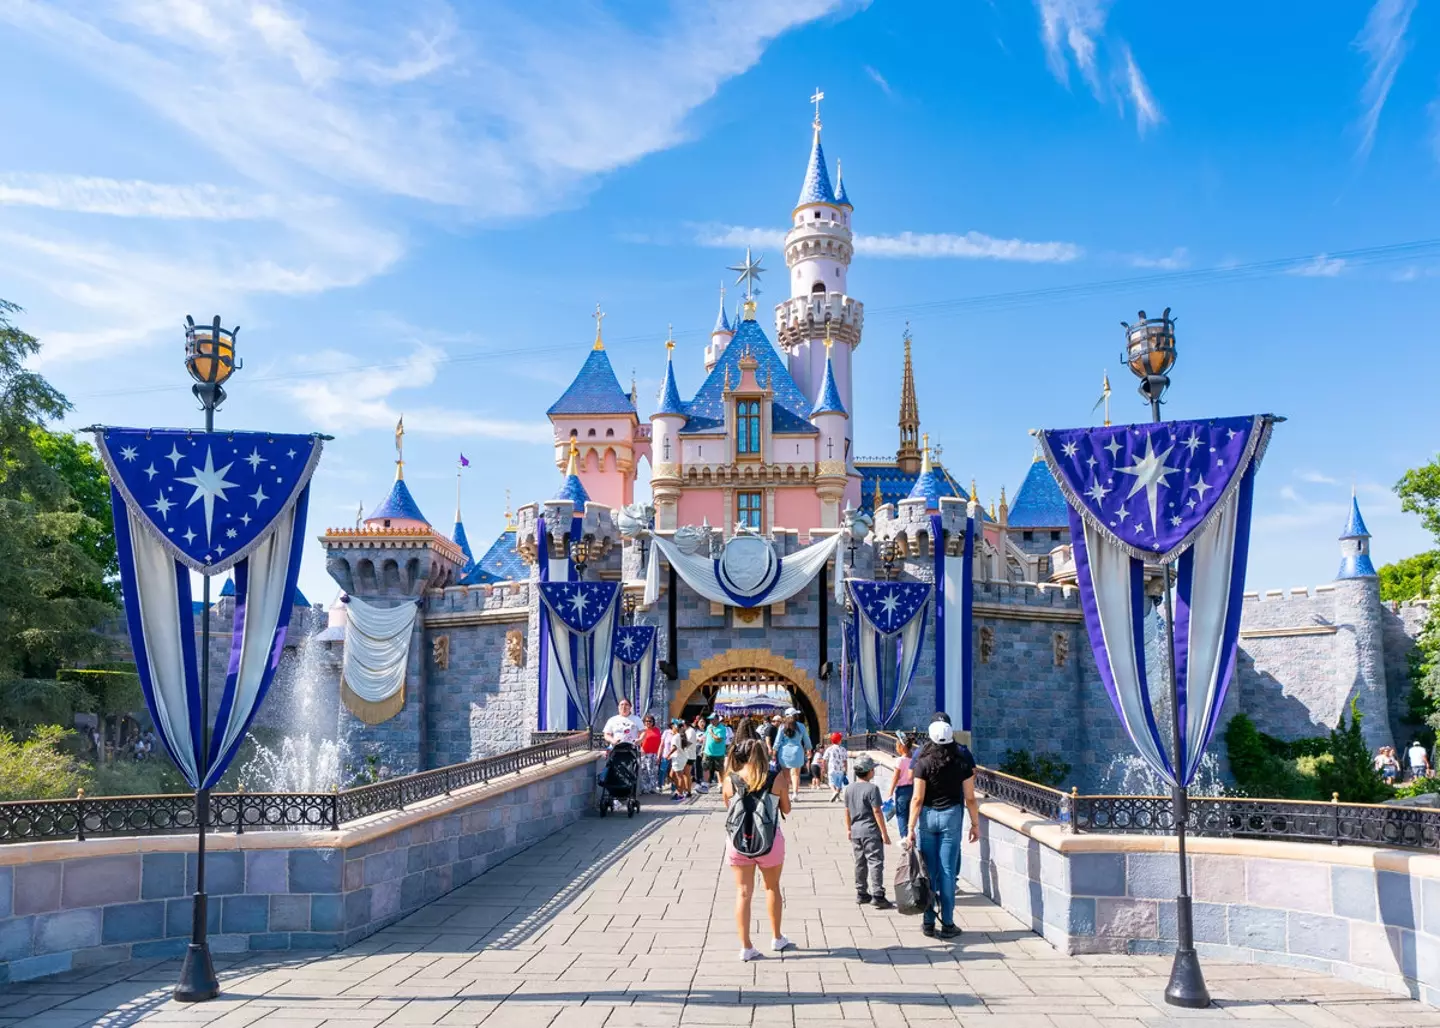 Disney is offering $50 tickets for children aged between 3-9.